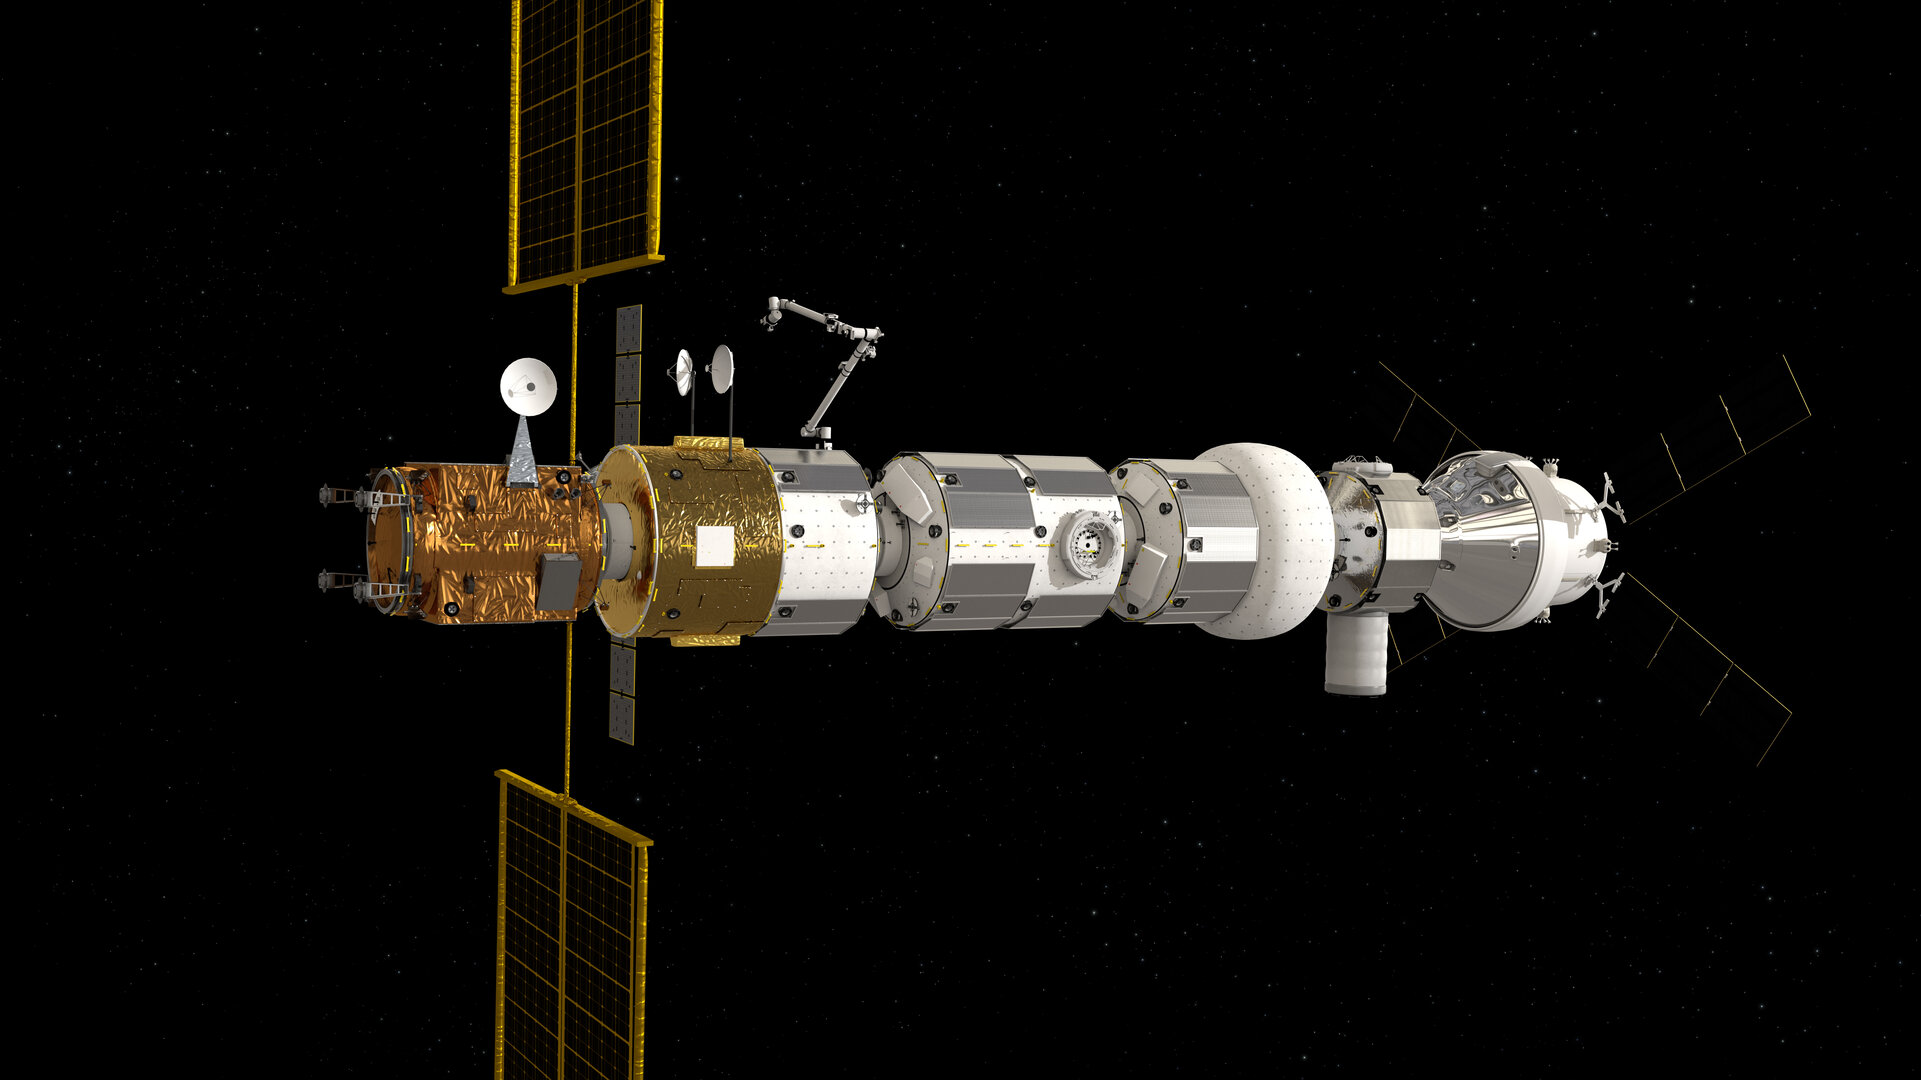 Gateway with Orion docked